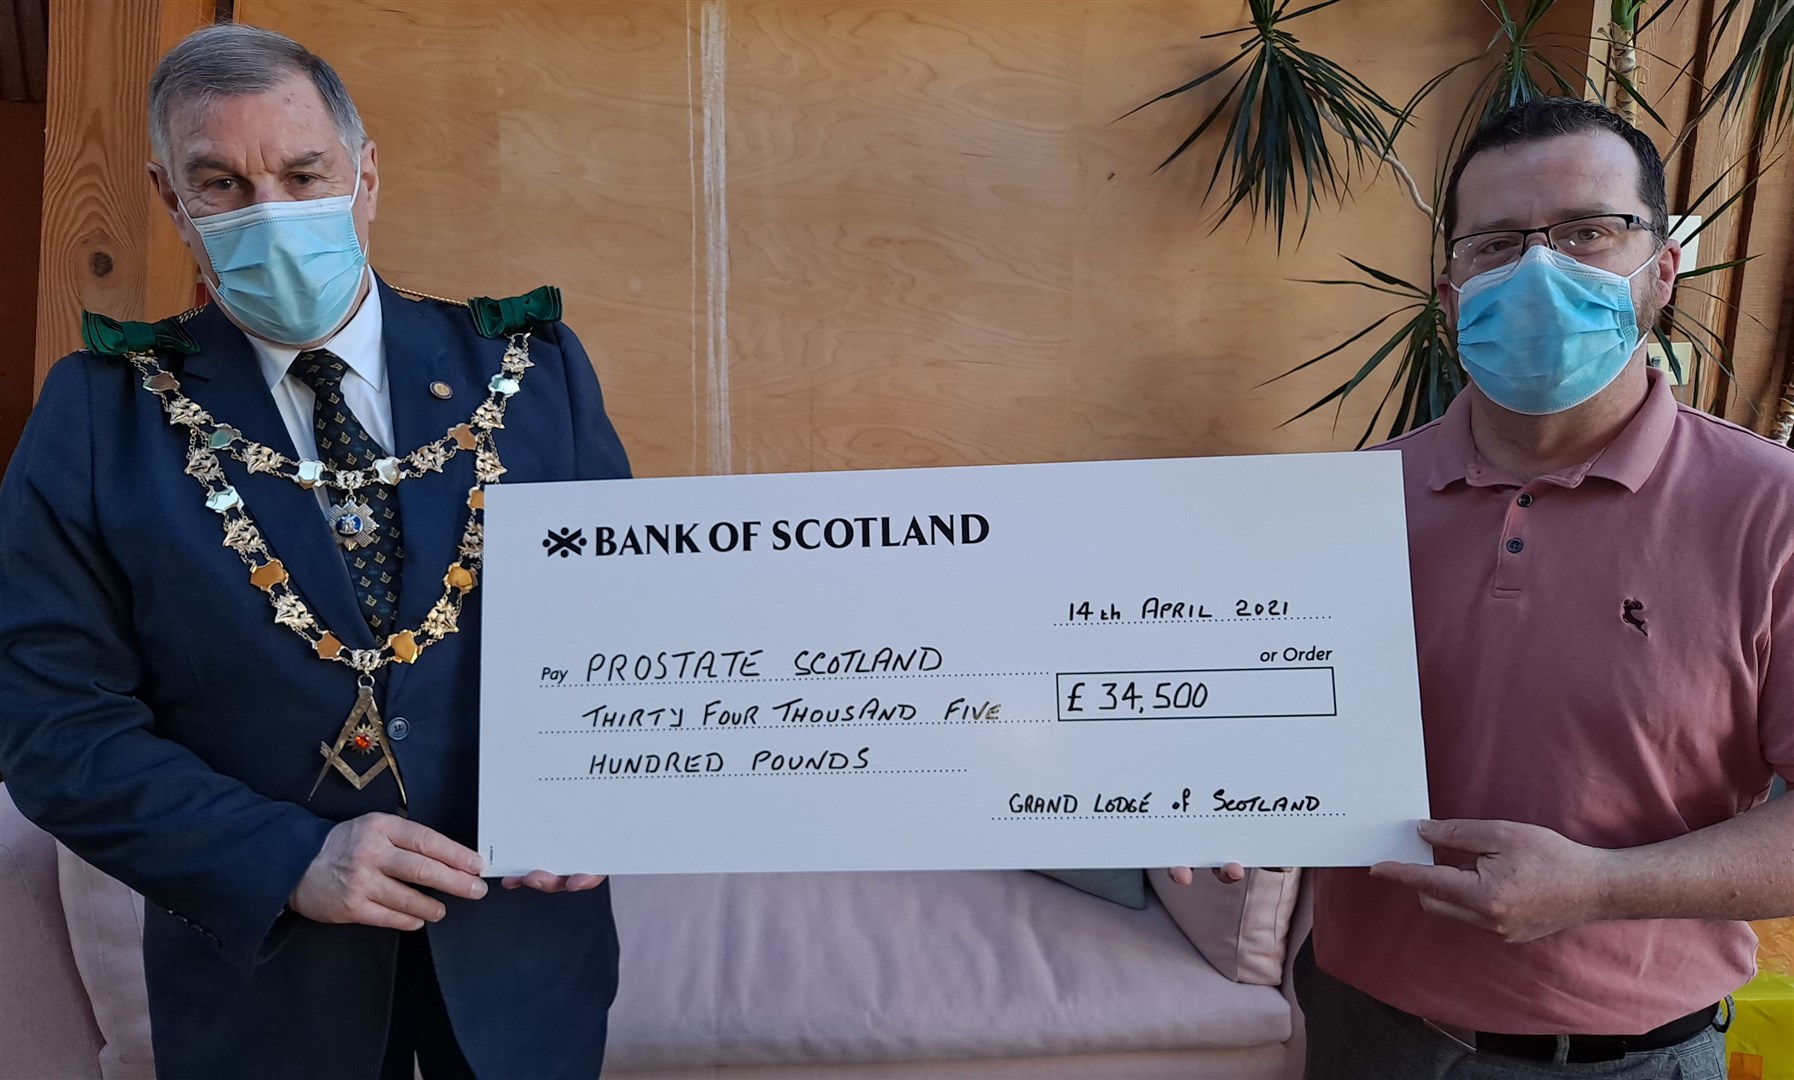 Ramsay McGhee presents a cheque for £34.500 to Brian Corr, a member of Prostate Scotland’s medical advisory committee and urology clinical nurse specialist at Raigmore Hospital.